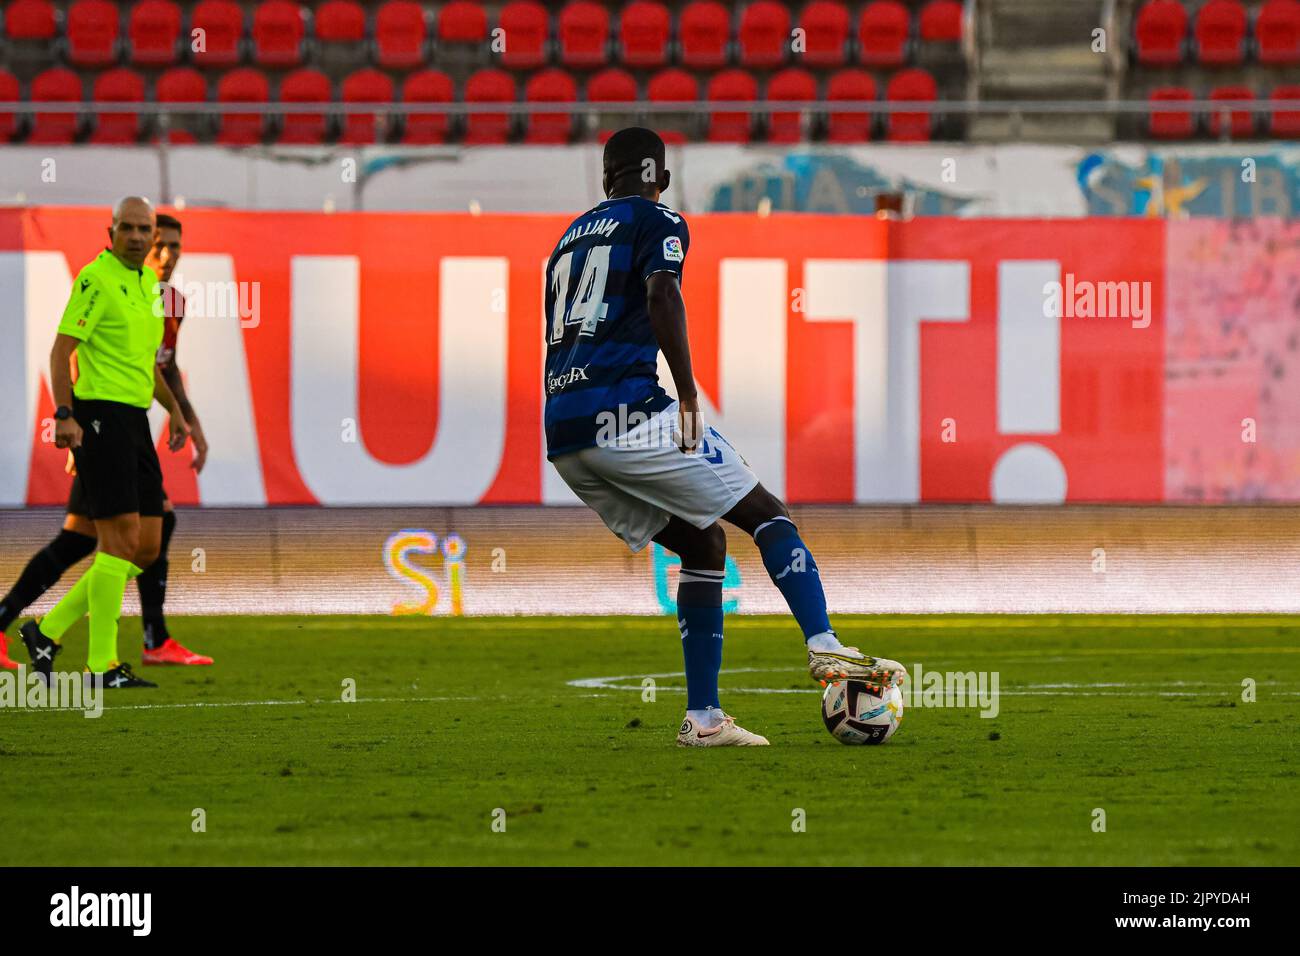 MALLORCA, SPAIN - AUGUST 20: William Carvalho of Real Betis in the match between RCD Mallorca and Real Betis of La Liga Santander on August 20, 2022 at Visit Mallorca Stadium Son Moix in Mallorca, Spain. (Photo by Samuel Carreño/PxImages) Stock Photo